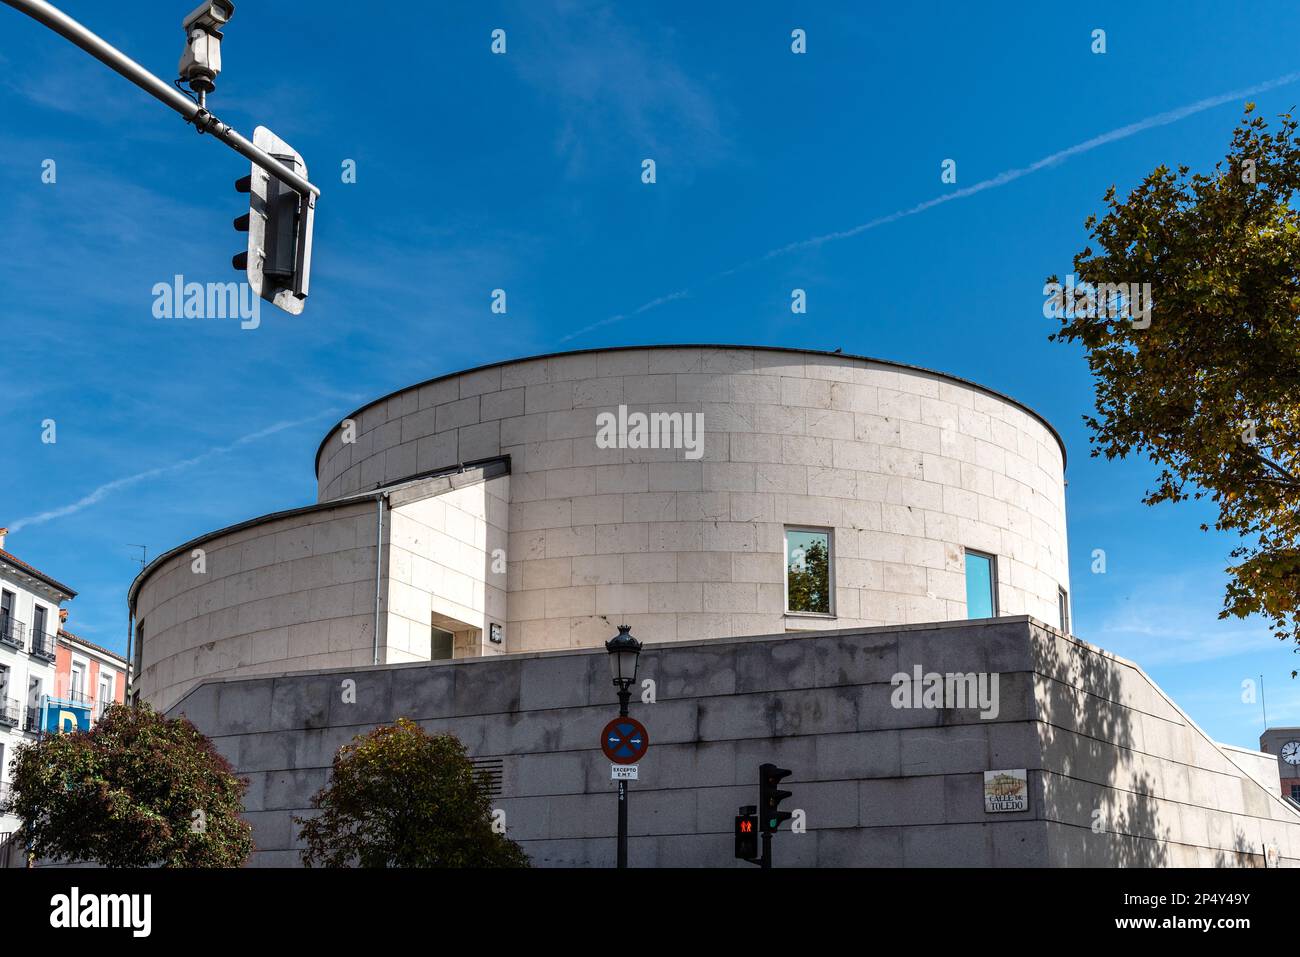 Madrid, Spain - November 1, 2020: Public Library Pedro Salinas in Puerta de Toledo in central Madrid. Sunny autumn day with blue sky. Designed by Juan Stock Photo